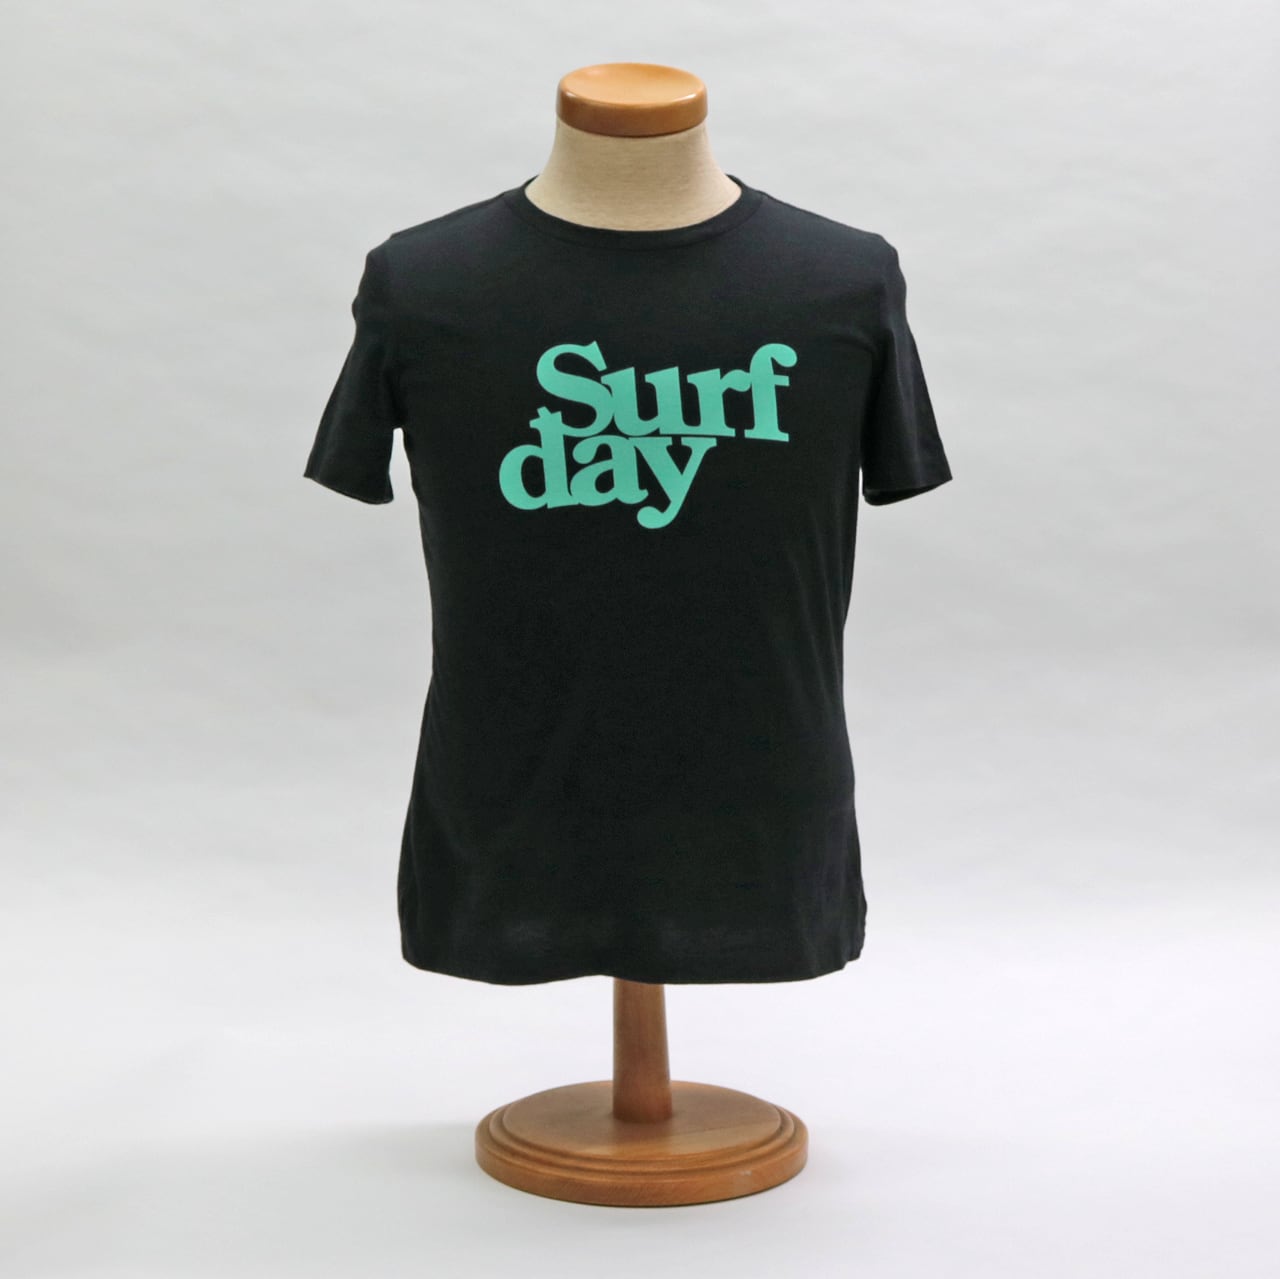 Surf day (Charcoal Heather)